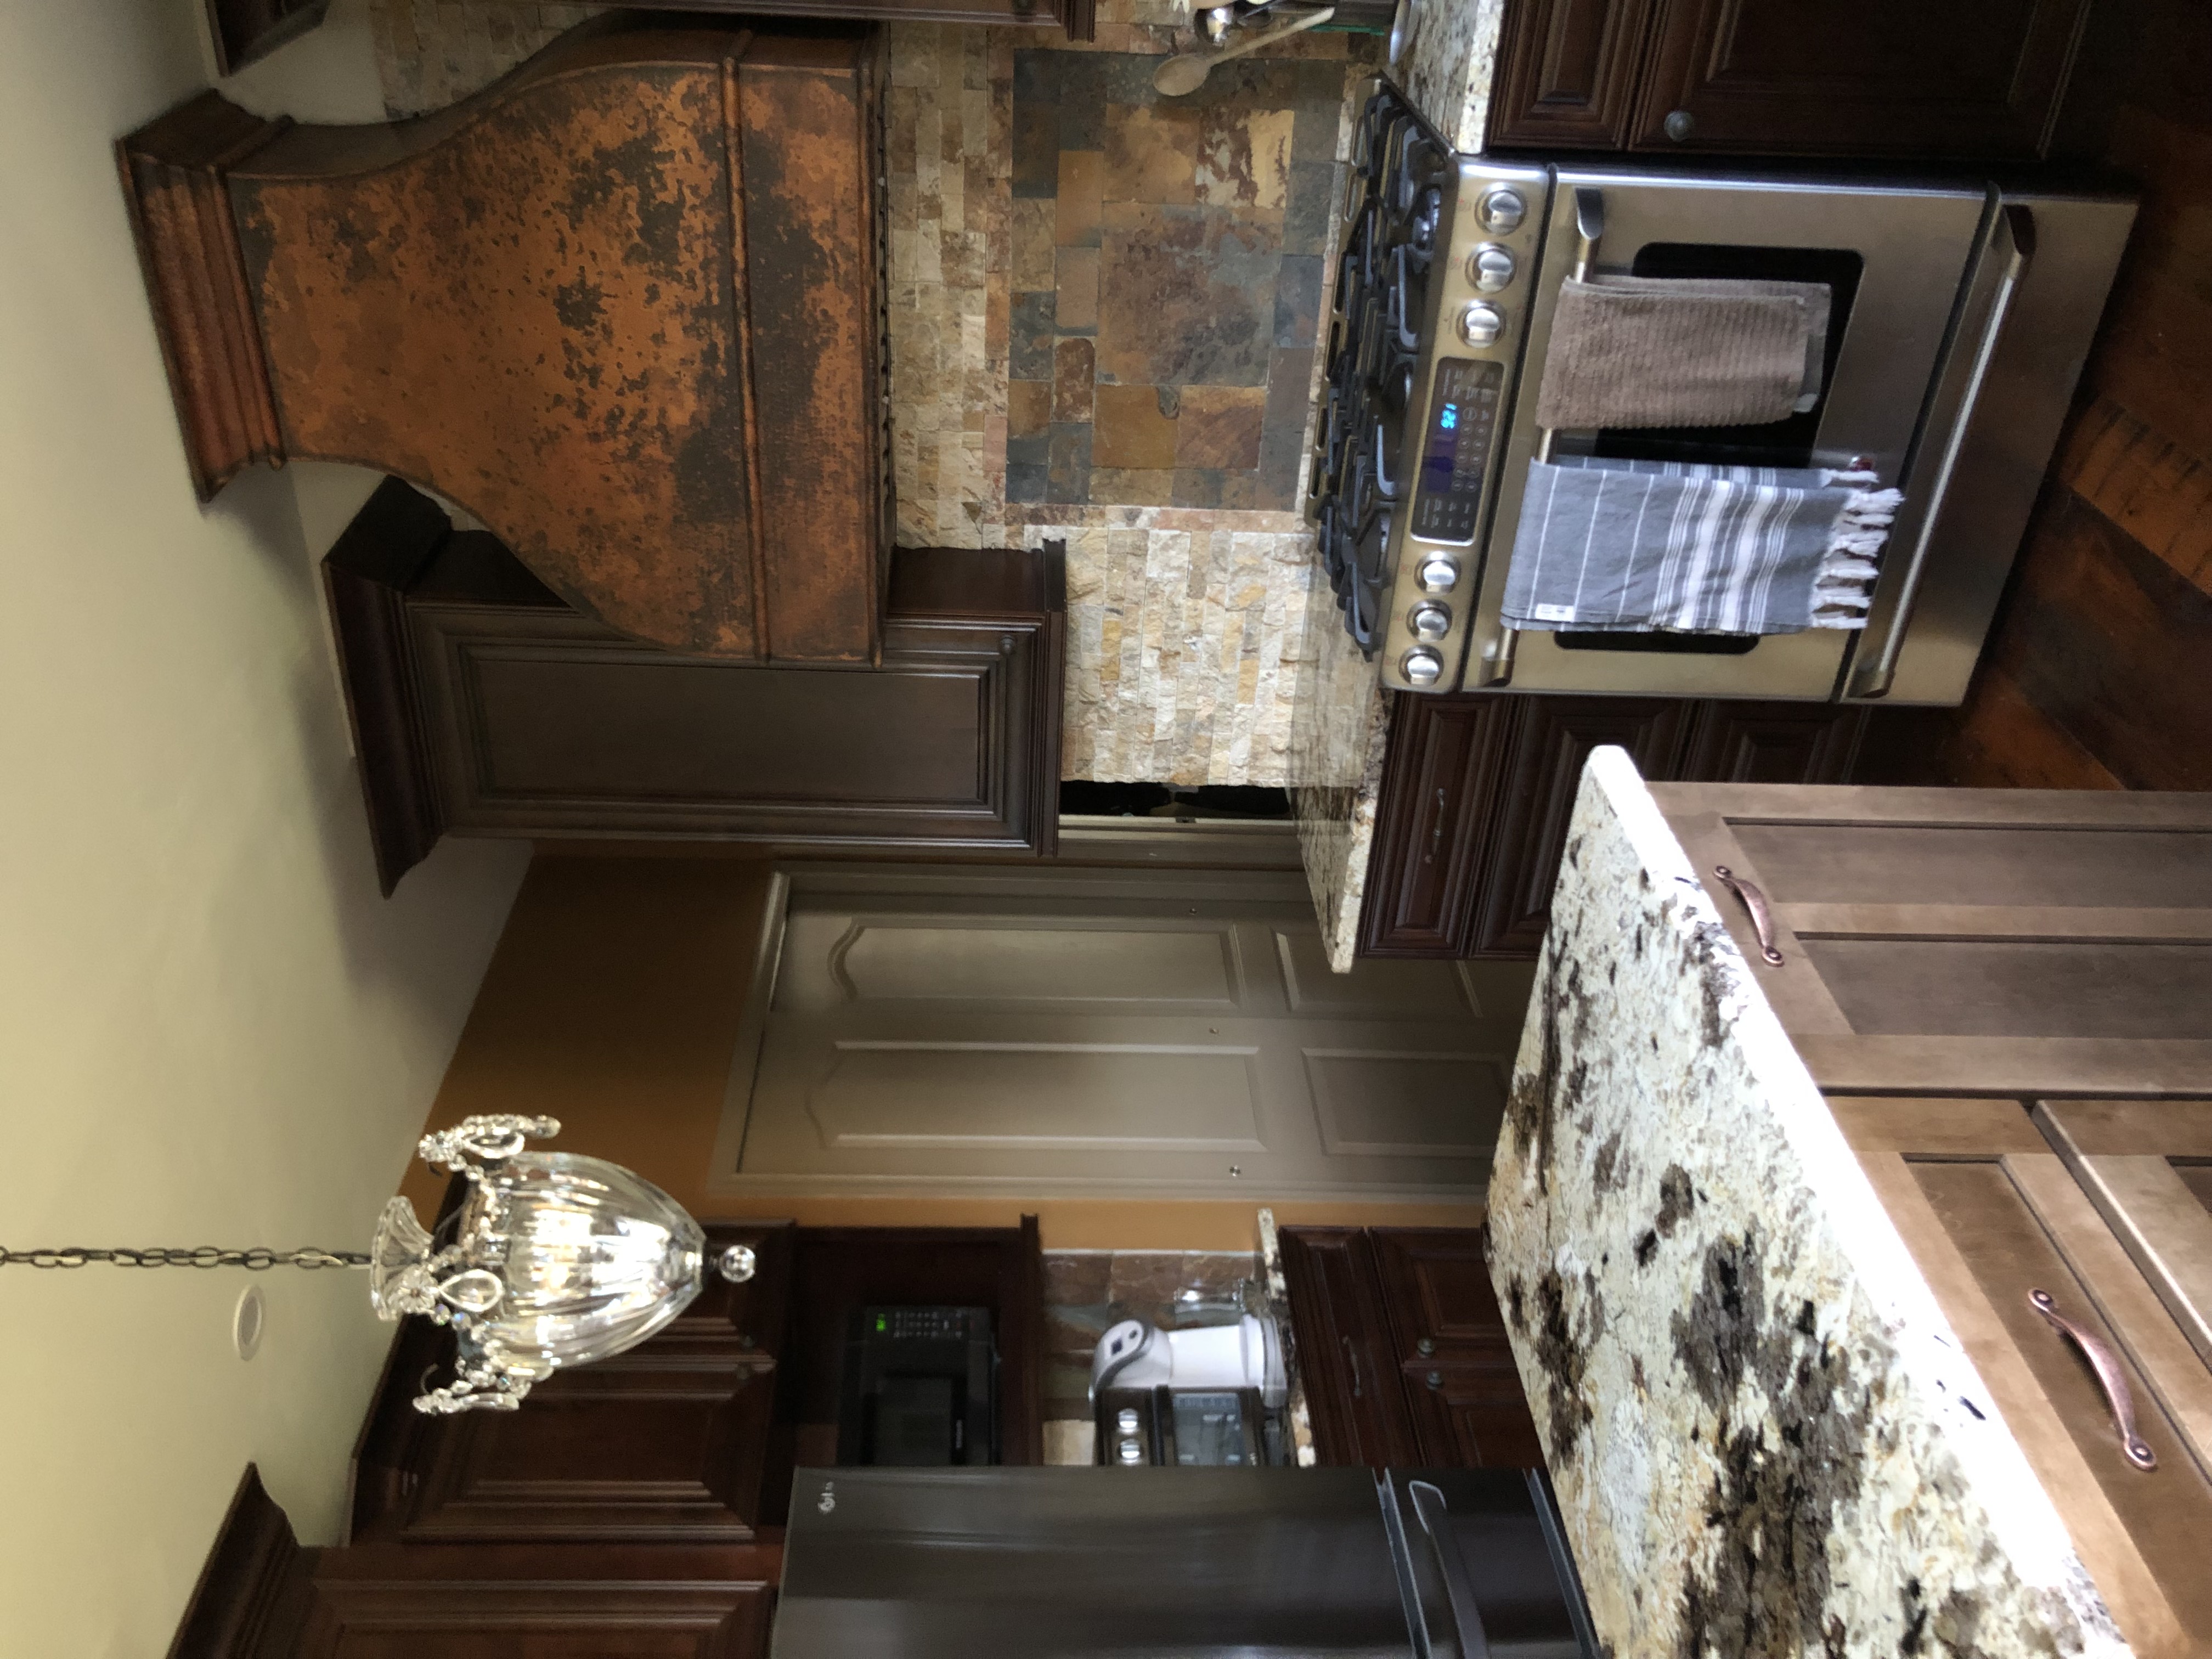 Rustic kitchen with brown cabinets, marble countertops, brick backsplash, complemented by a sleek range hood design